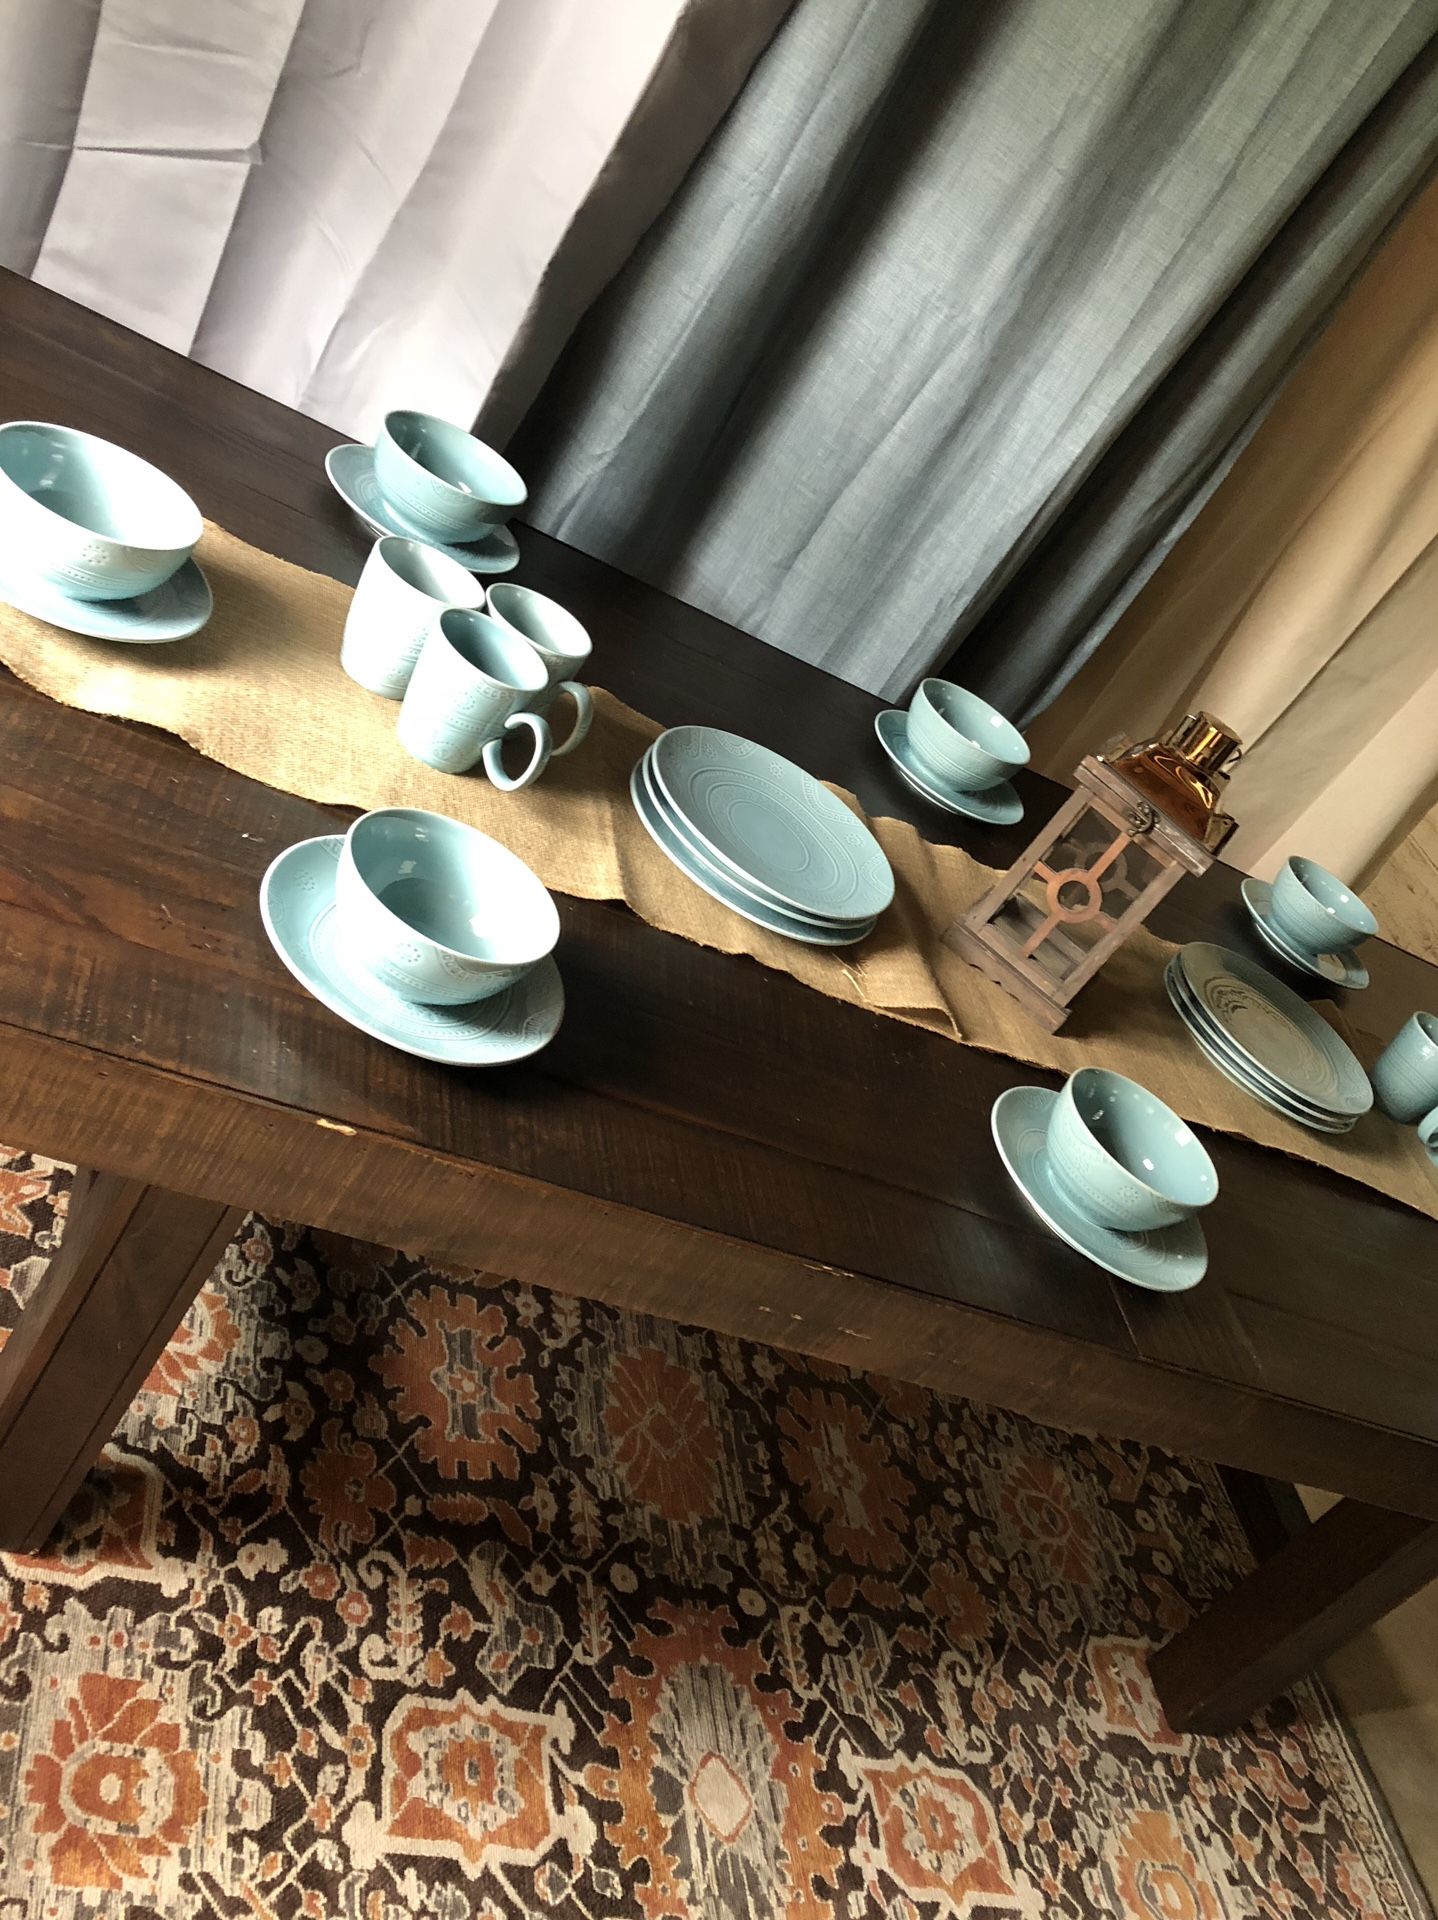 Large farmhouse style dining table